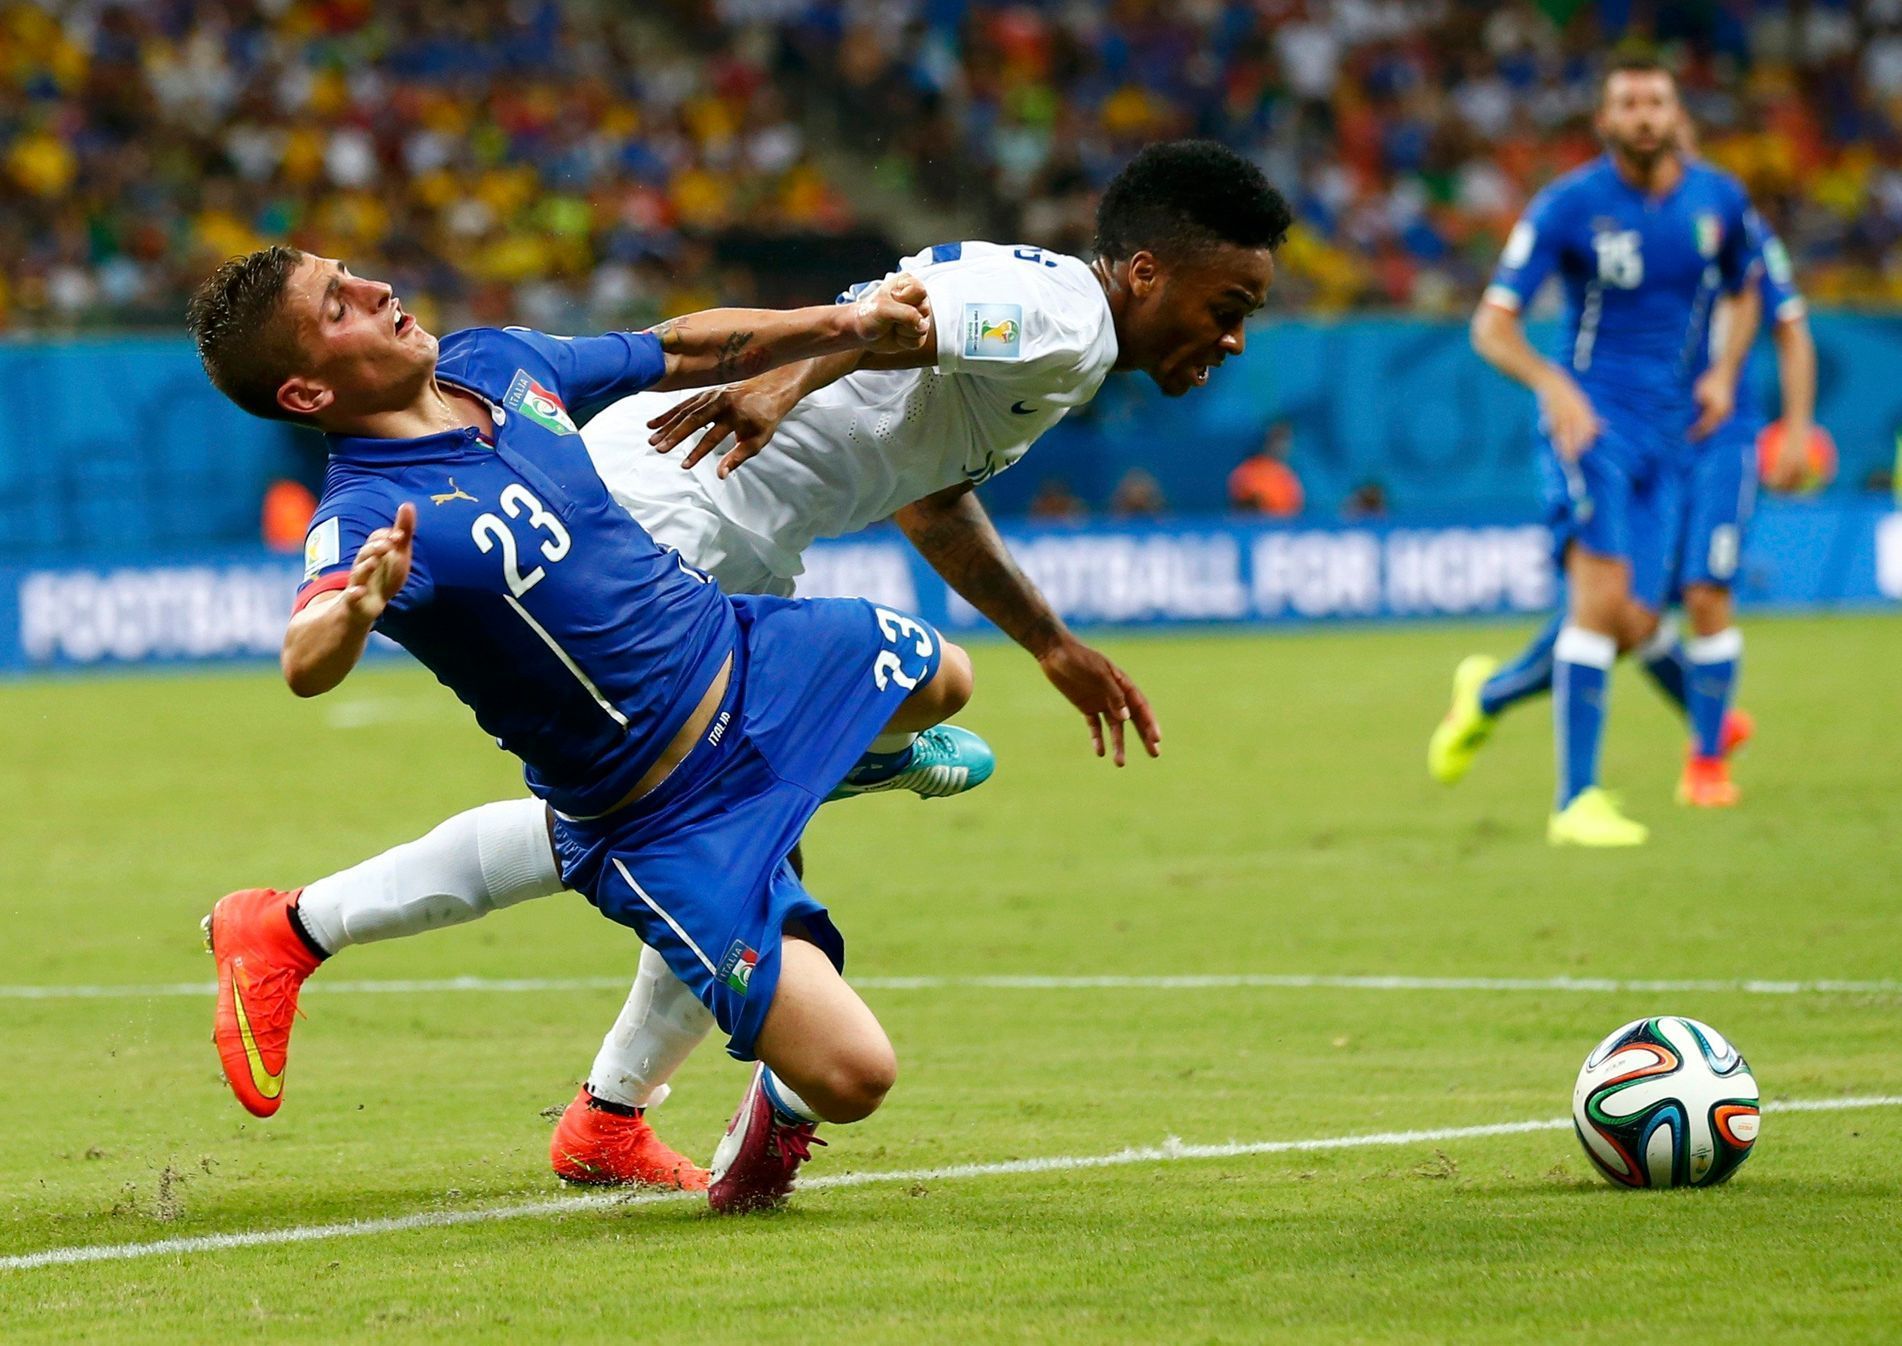 Italy's Verratti and England's Sterling fight for the ball during their 2014 World Cup Group D soccer match at the Amazonia arena in Manaus